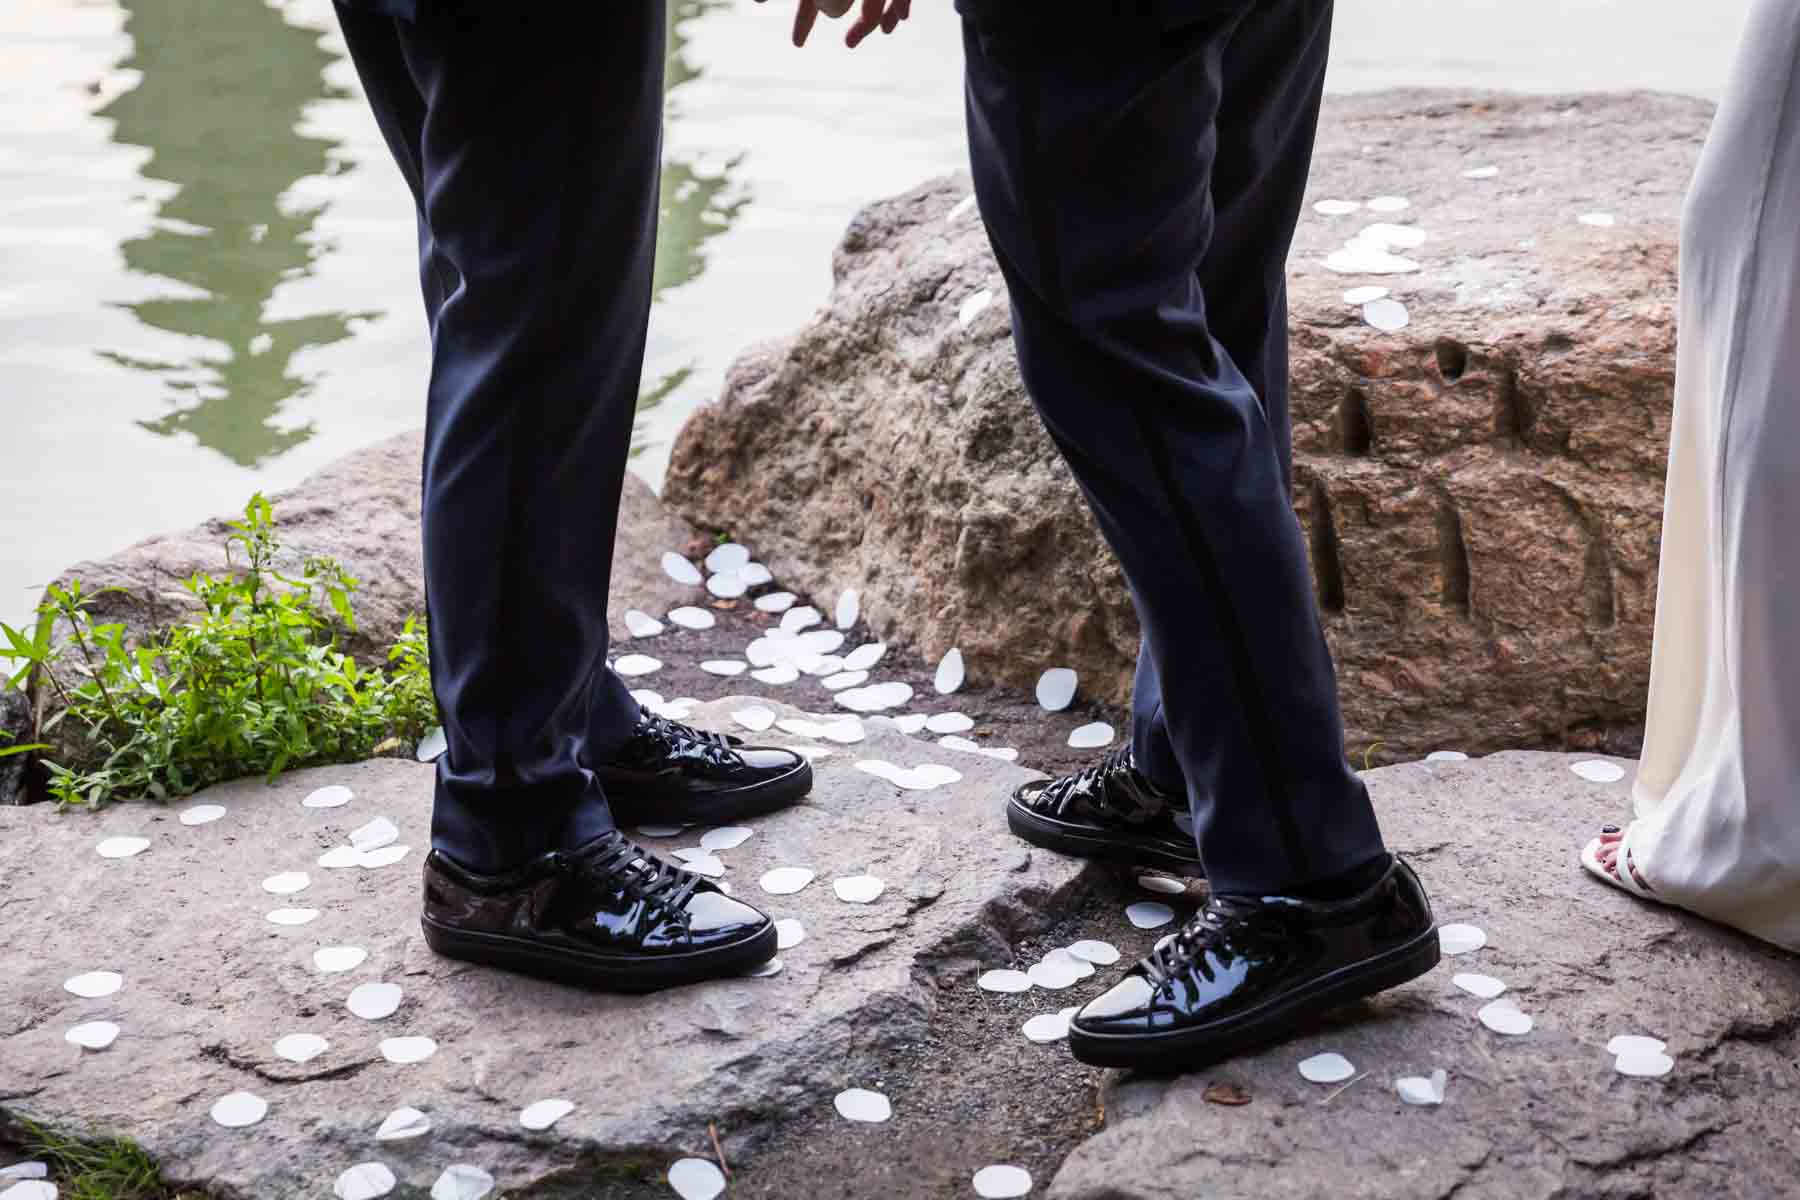 Grooms wearing matching patent leather shoes for an article entitled, ‘Do you need a permit to get married in Central Park?’